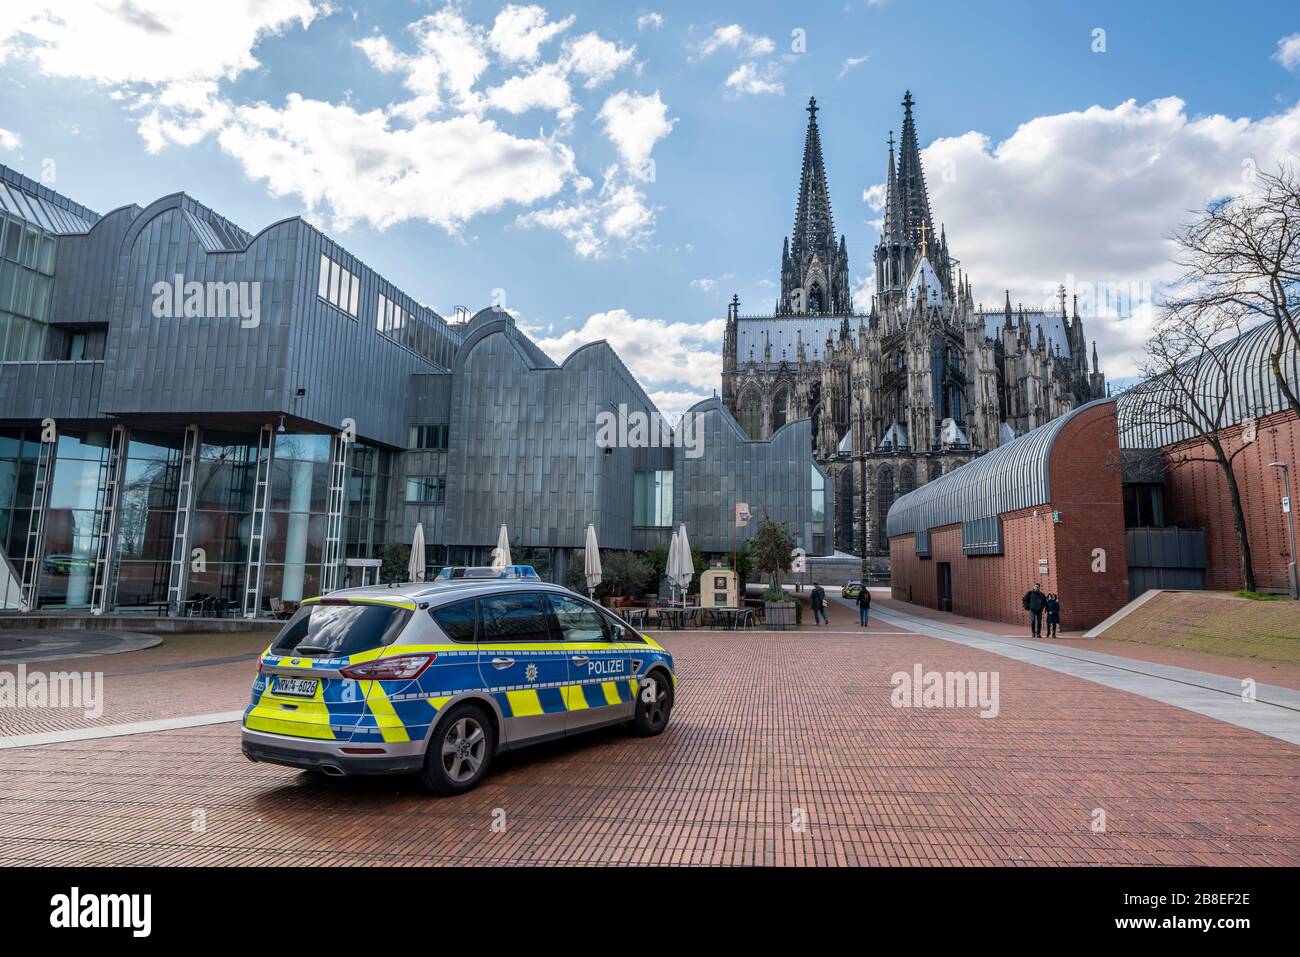 Effects of the coronavirus crisis, empty shopping street, police patrol car, Cologne Cathedral, Heinrich-Bšll-Platz, in Cologne, Germany Stock Photo